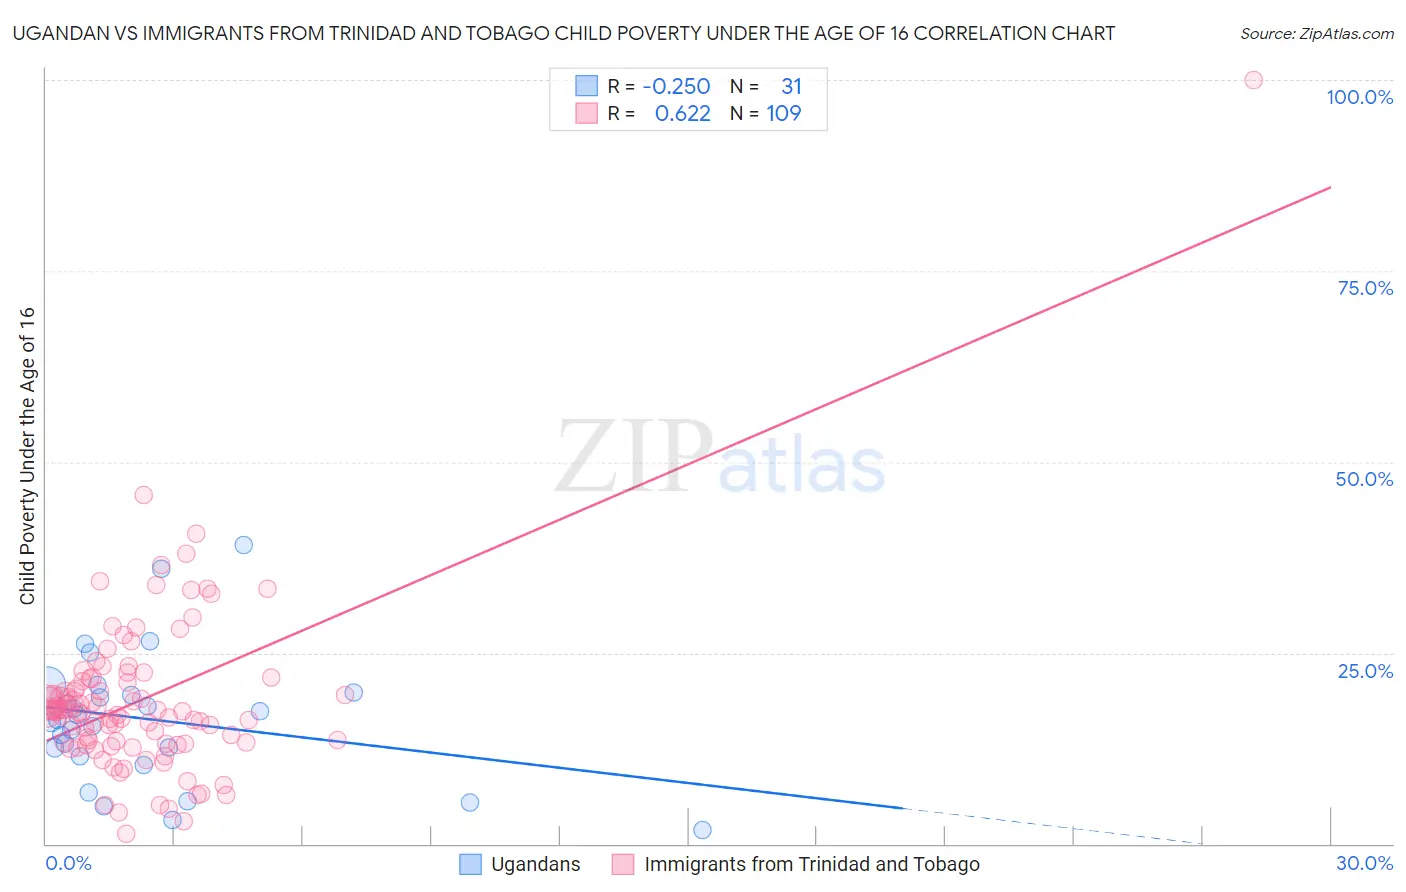 Ugandan vs Immigrants from Trinidad and Tobago Child Poverty Under the Age of 16